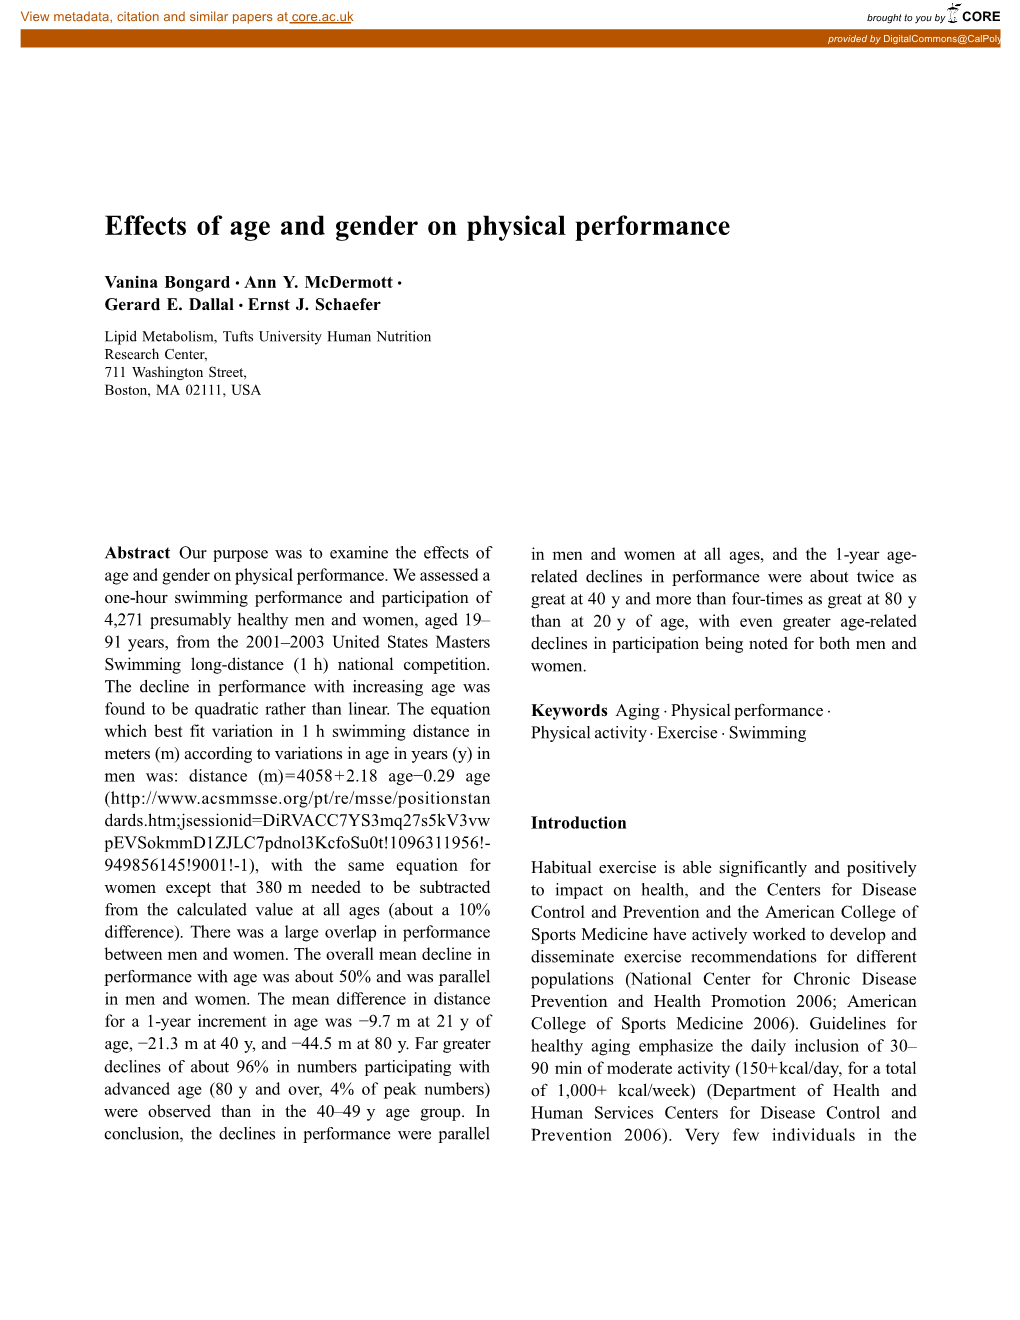 Effects of Age and Gender on Physical Performance